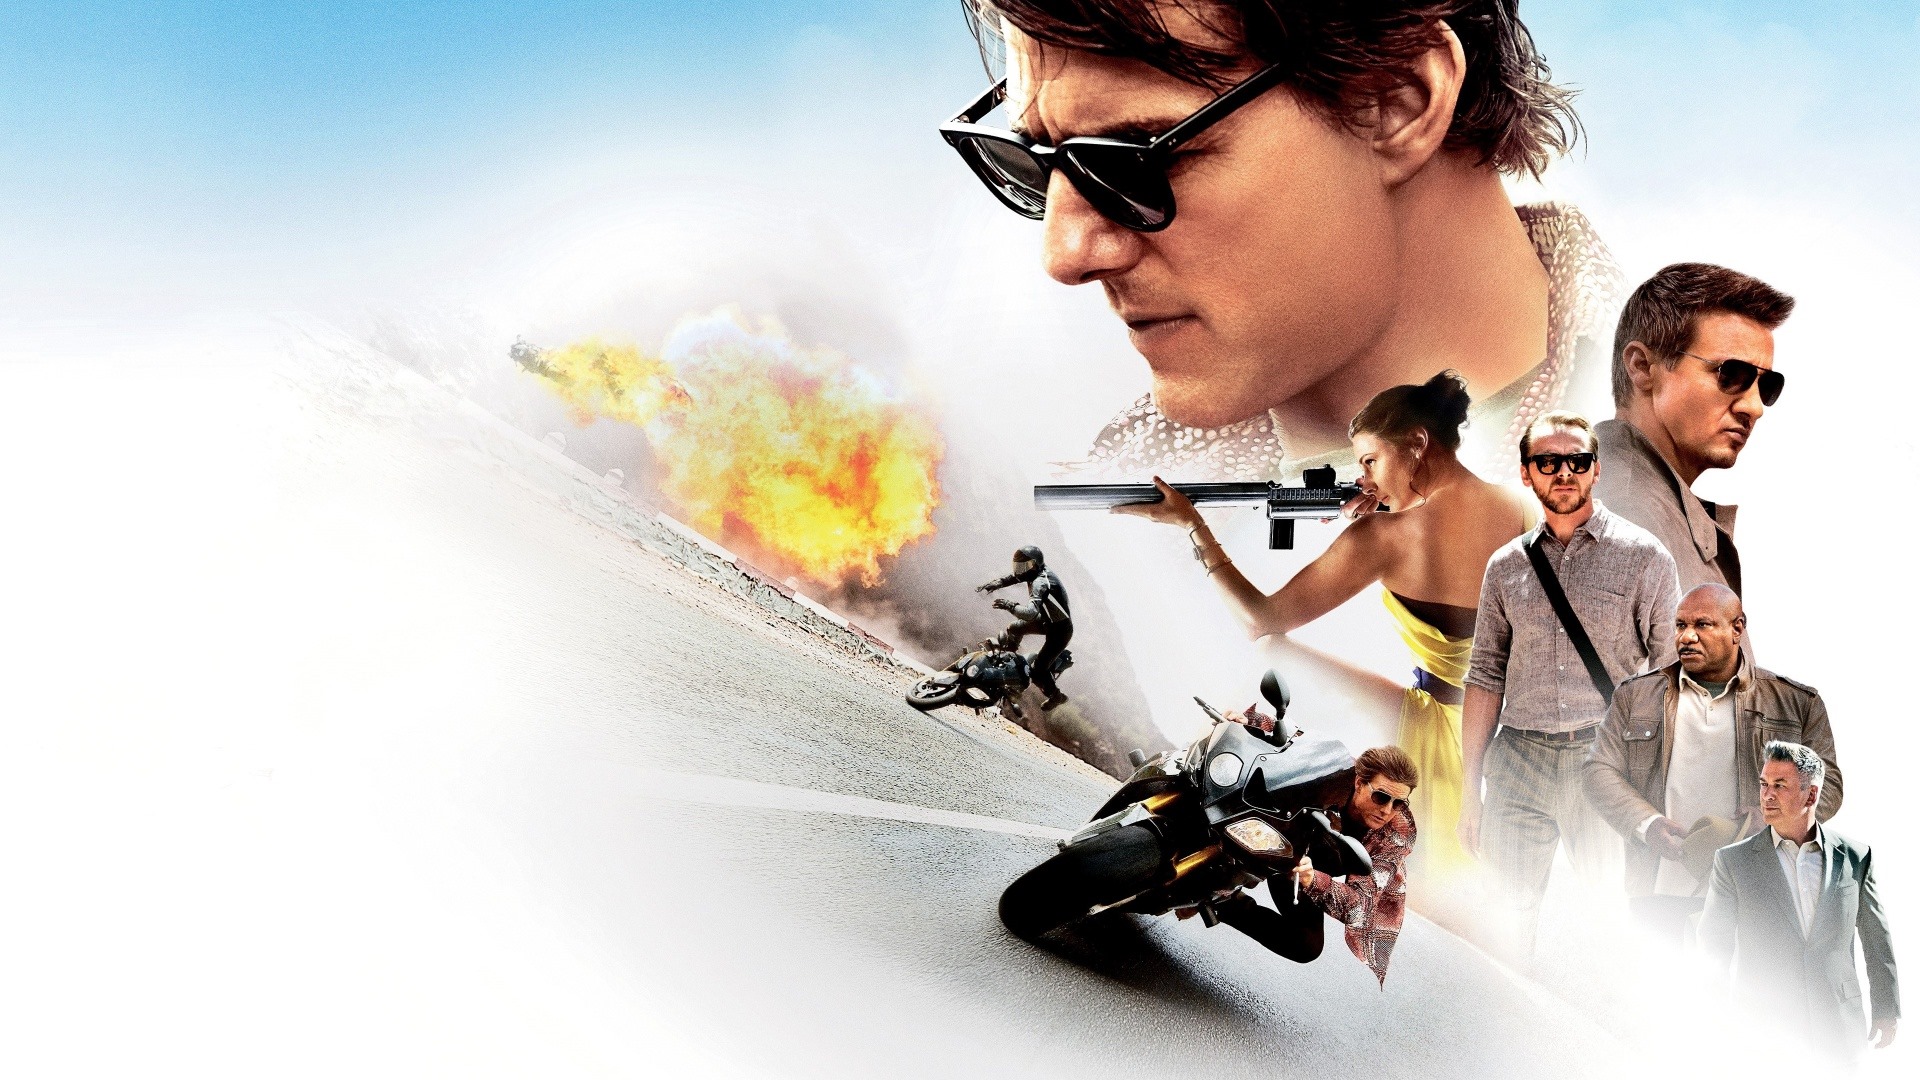 Mission Impossible: Rogue Nation, HD movie wallpapers #1 - 1920x1080